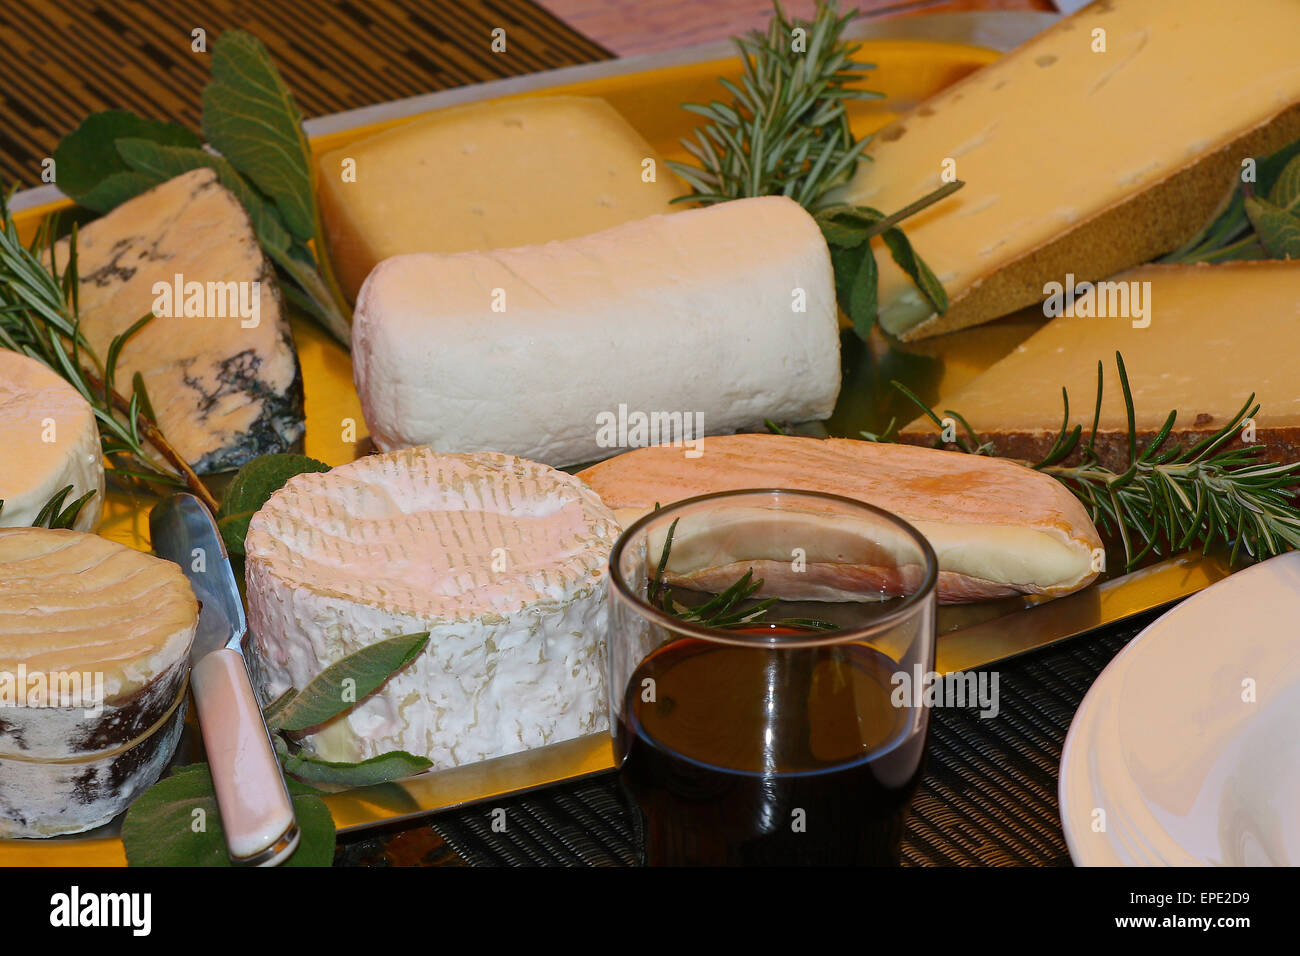 Assortment of various kinds of hard and soft cheese with basil decorations Stock Photo